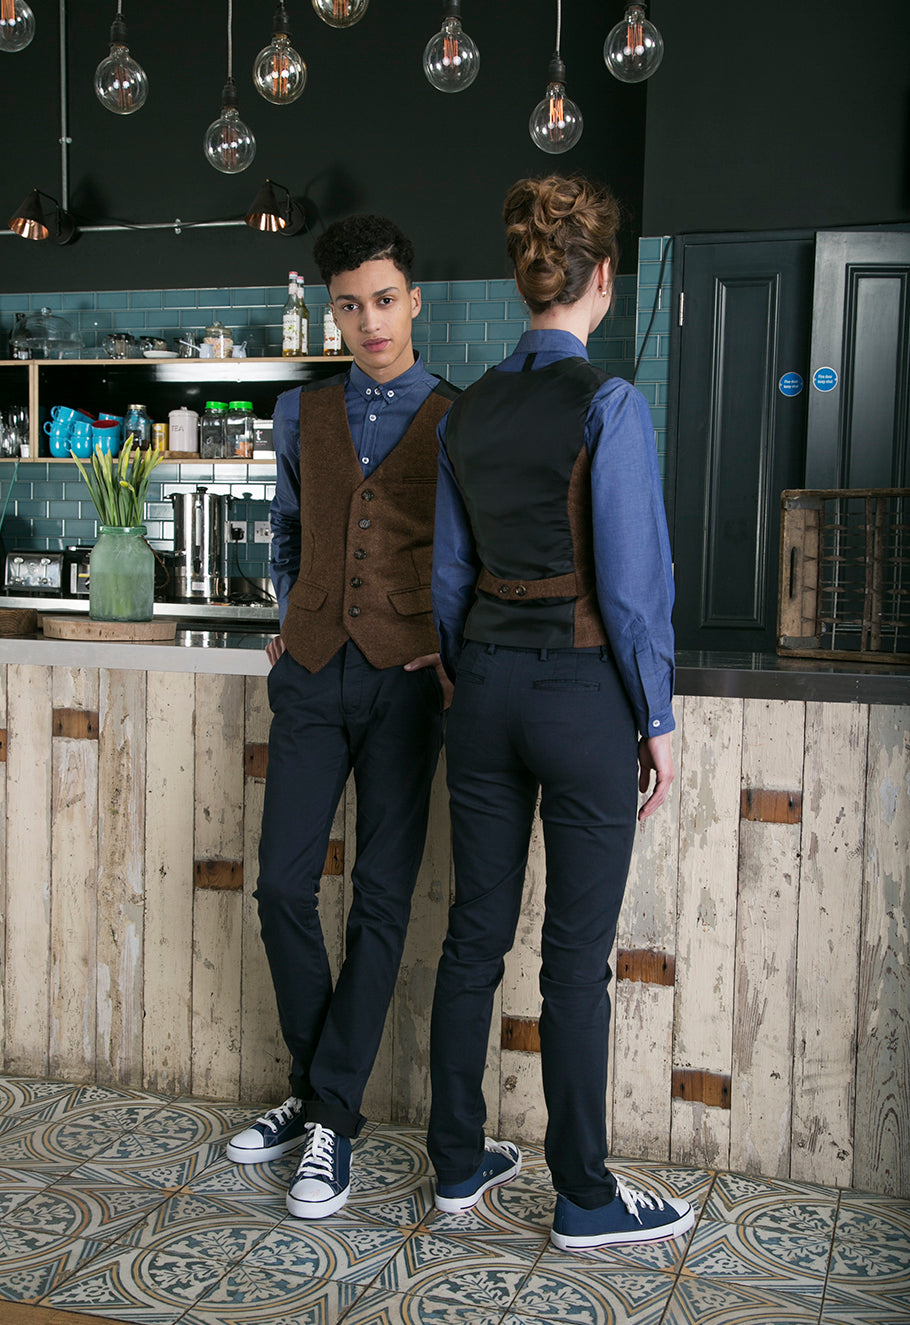 Male Single Breasted Fitted Waistcoat - Sale - Black, Dark Navy